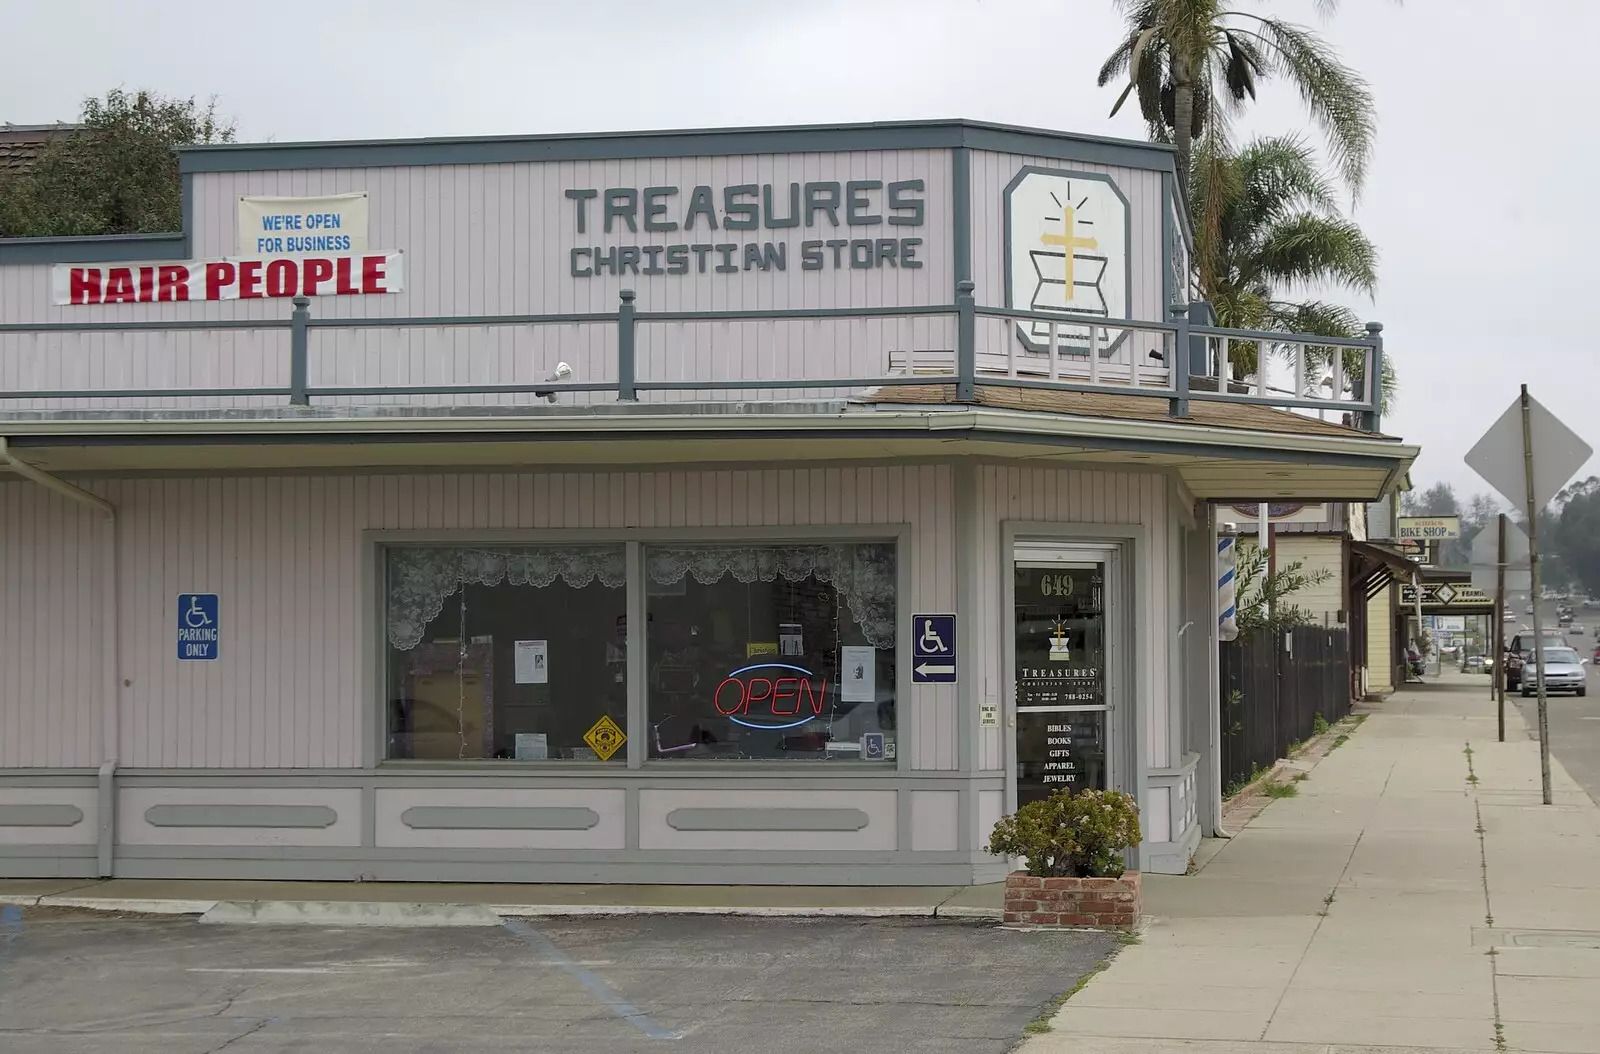 The Treasures Christian Store, from San Diego 8: The Beaches of Torrey Pines, and Ramona, California, USA - 29th February 2008